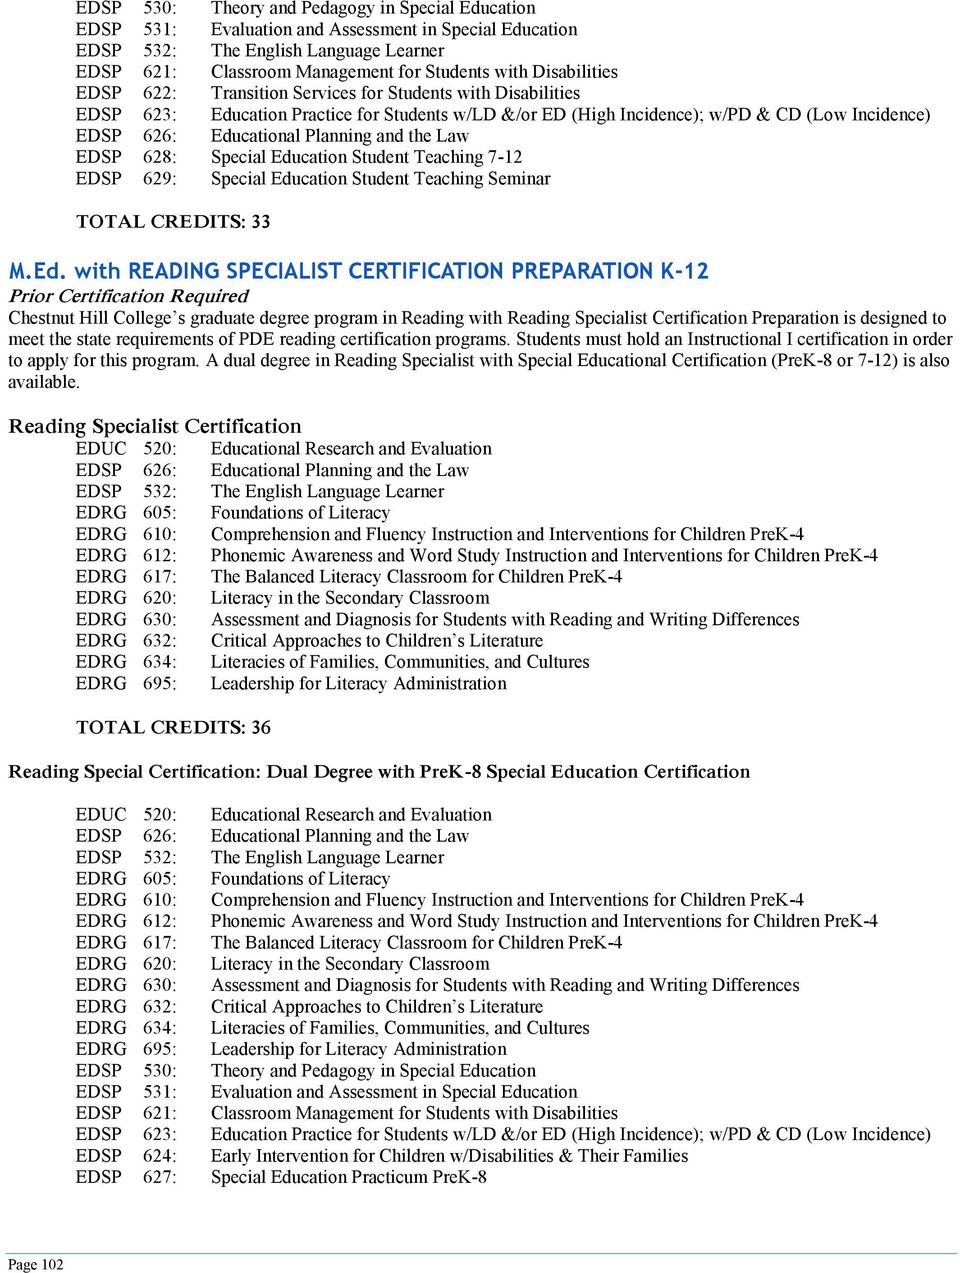 Education Student Teaching 7-12 EDSP 629: Special Education Student Teaching Seminar TOTAL CREDITS: 33 M.Ed. with READING SPECIALIST CERTIFICATION PREPARATION K-12 Prior Certification Required